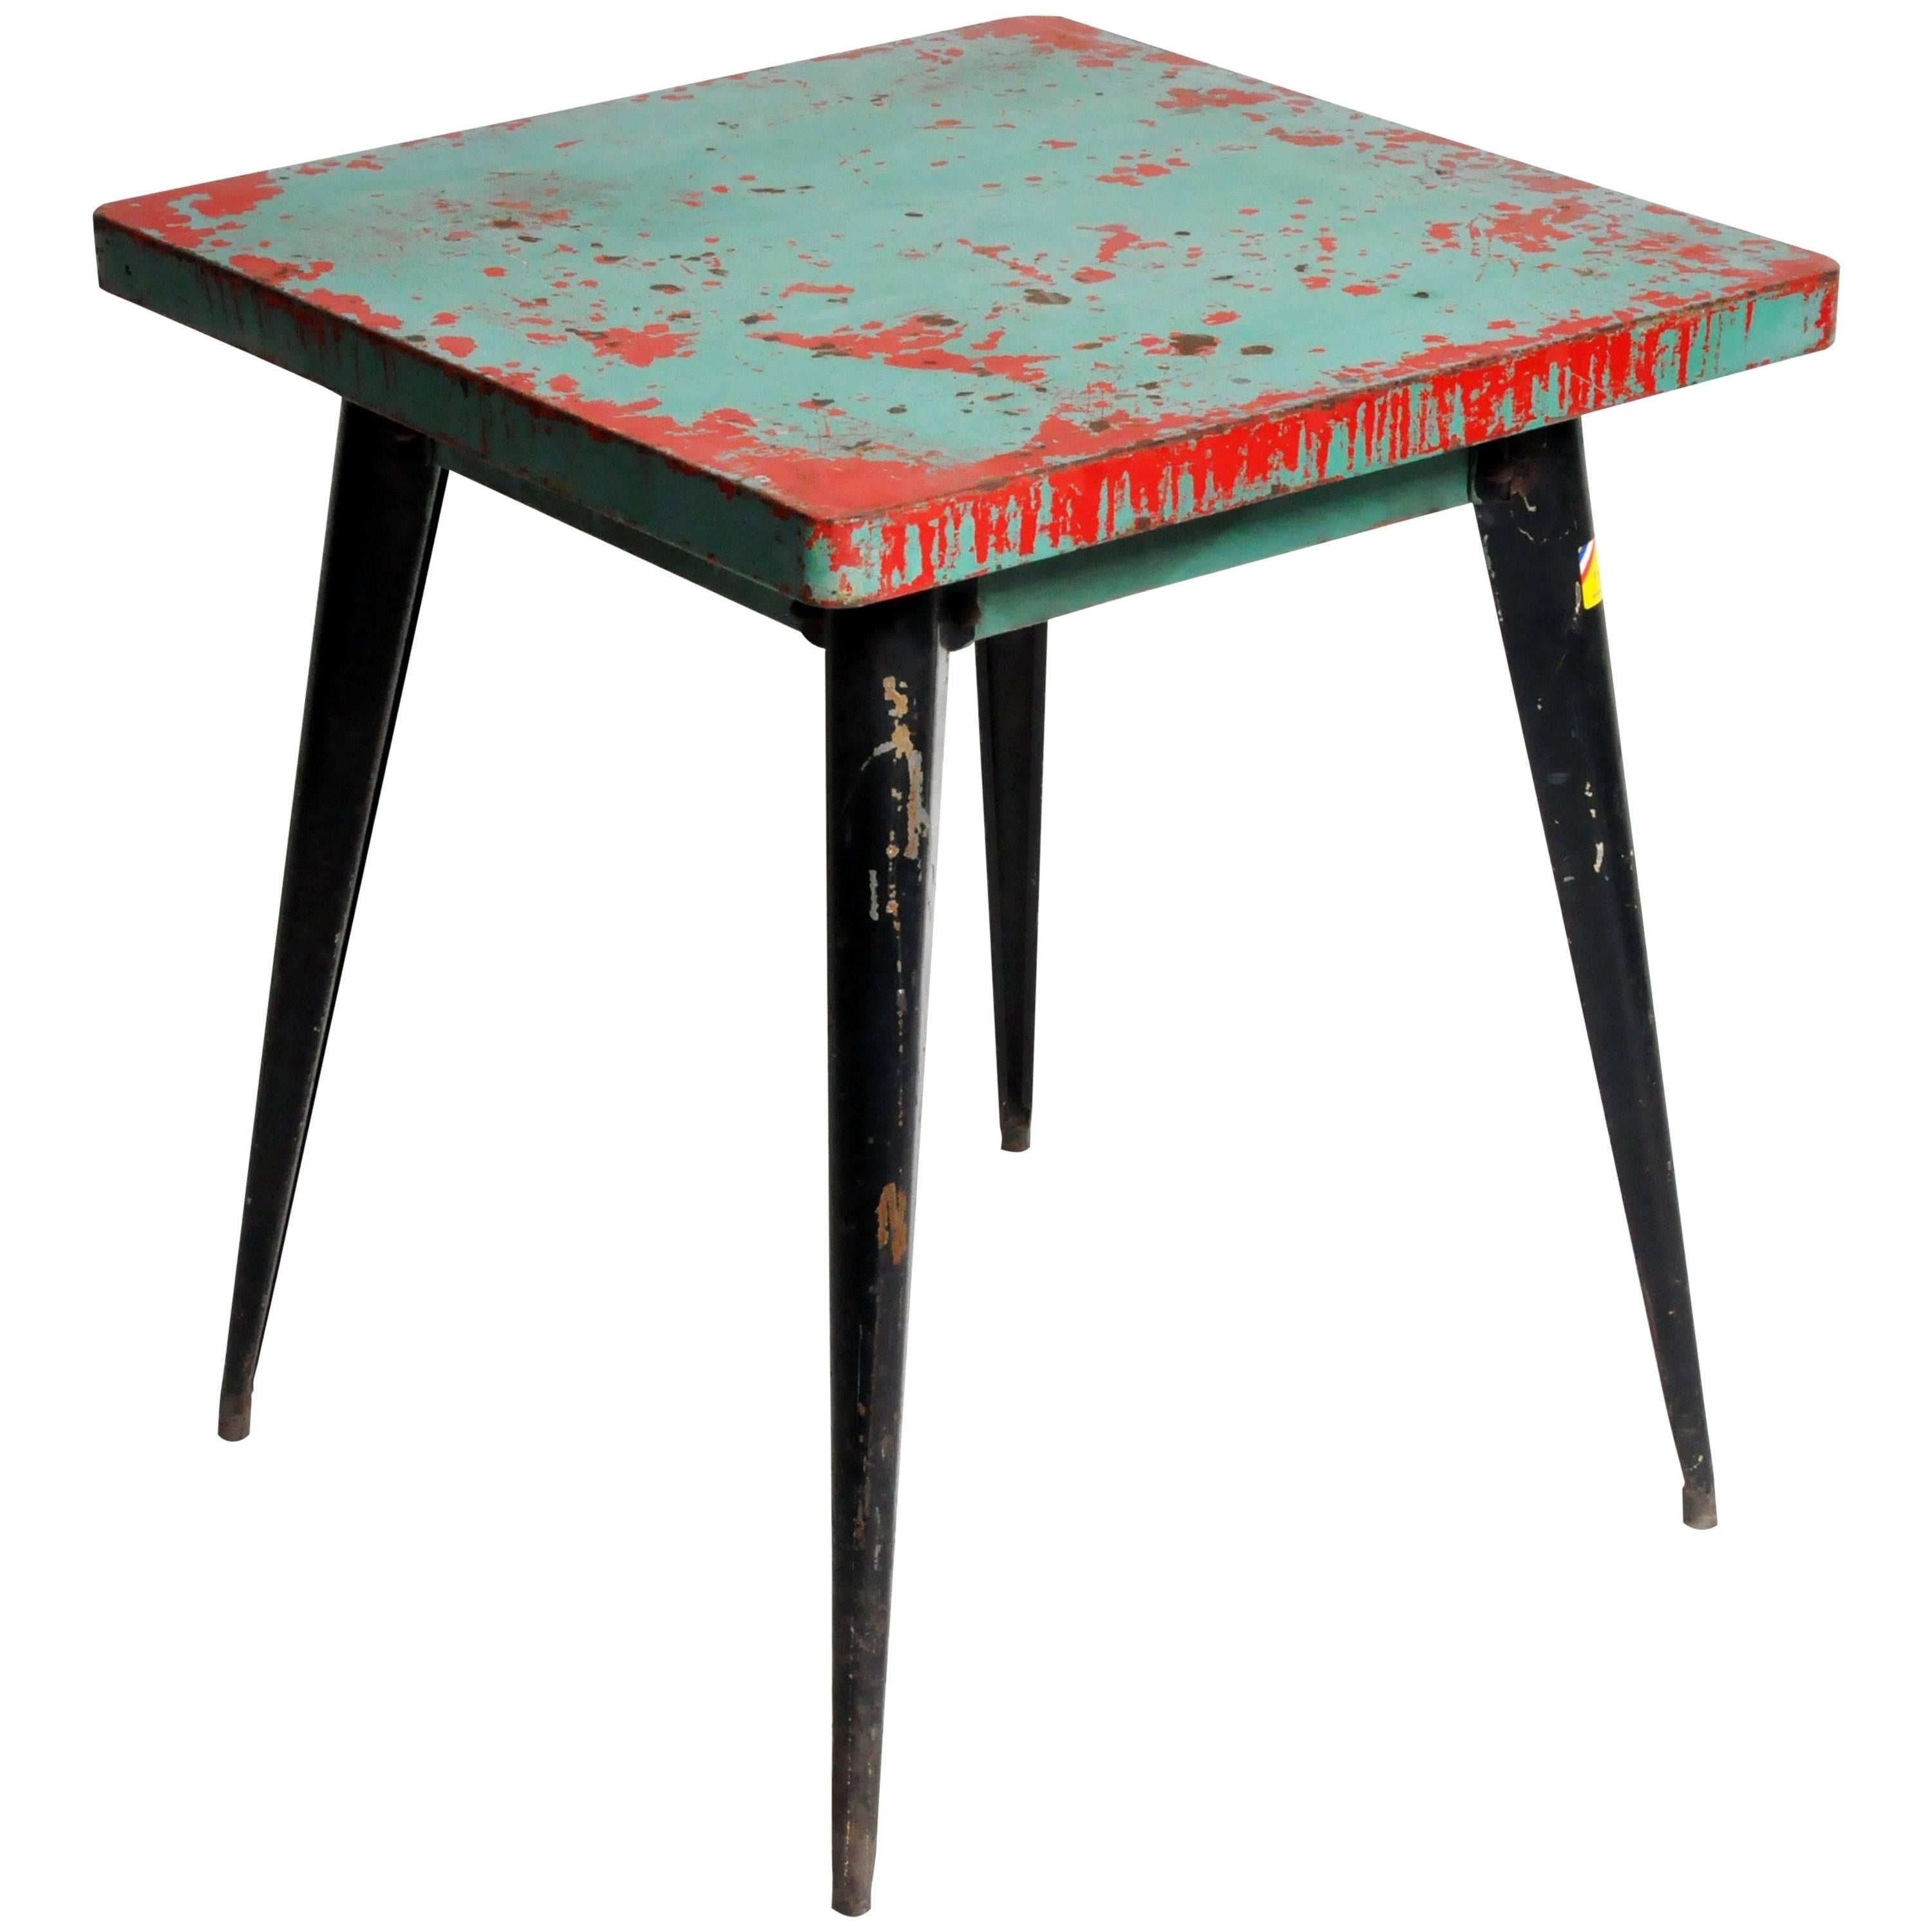 Mid-Century Modern Green Metal Outdoor Cafe Table by Tolix